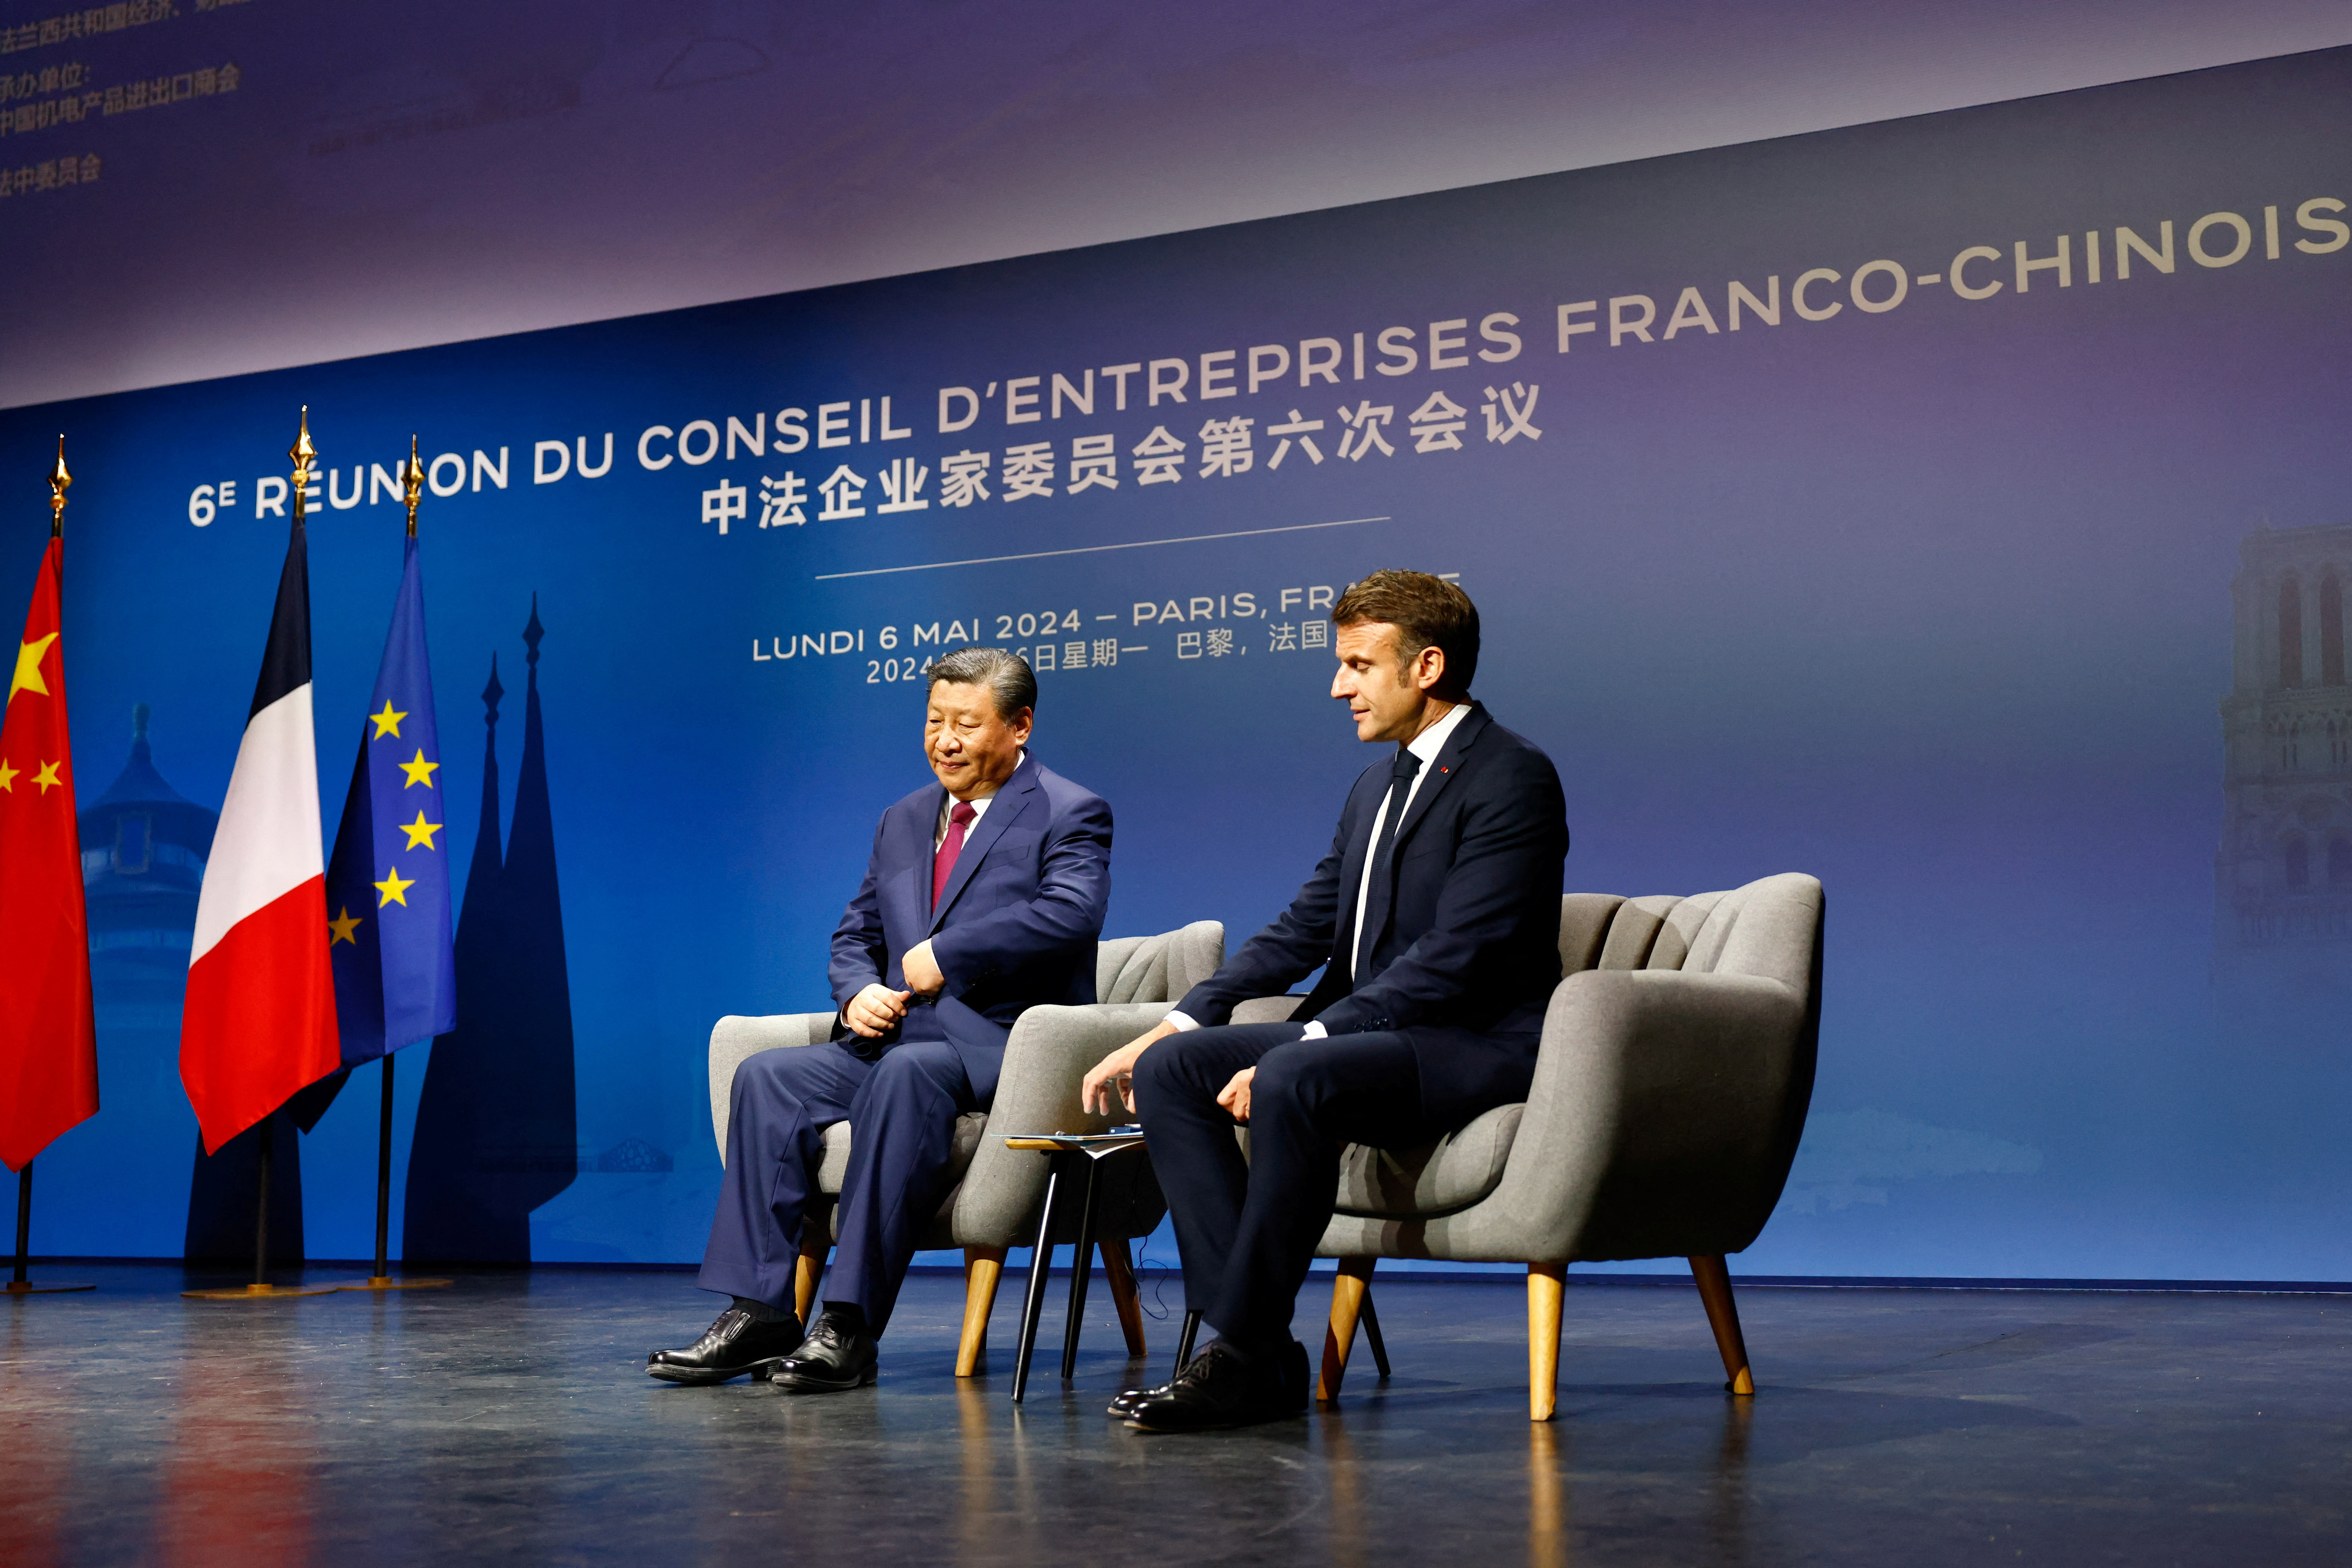 Closing speeches by French and Chinese presidents at Franco-Chinese Business Council